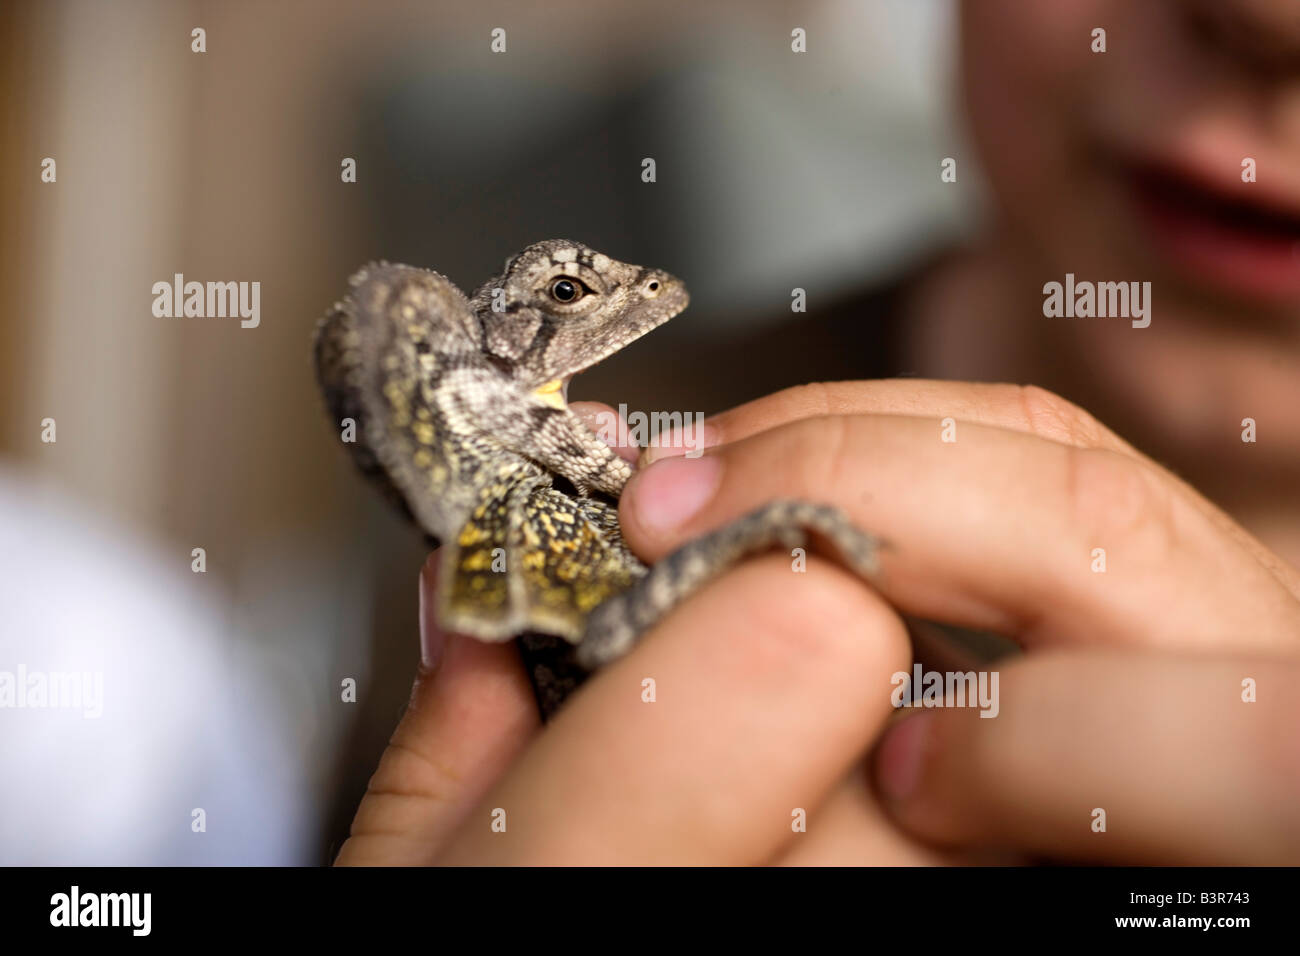 side view of frilled lizard, mouth open Stock Photo